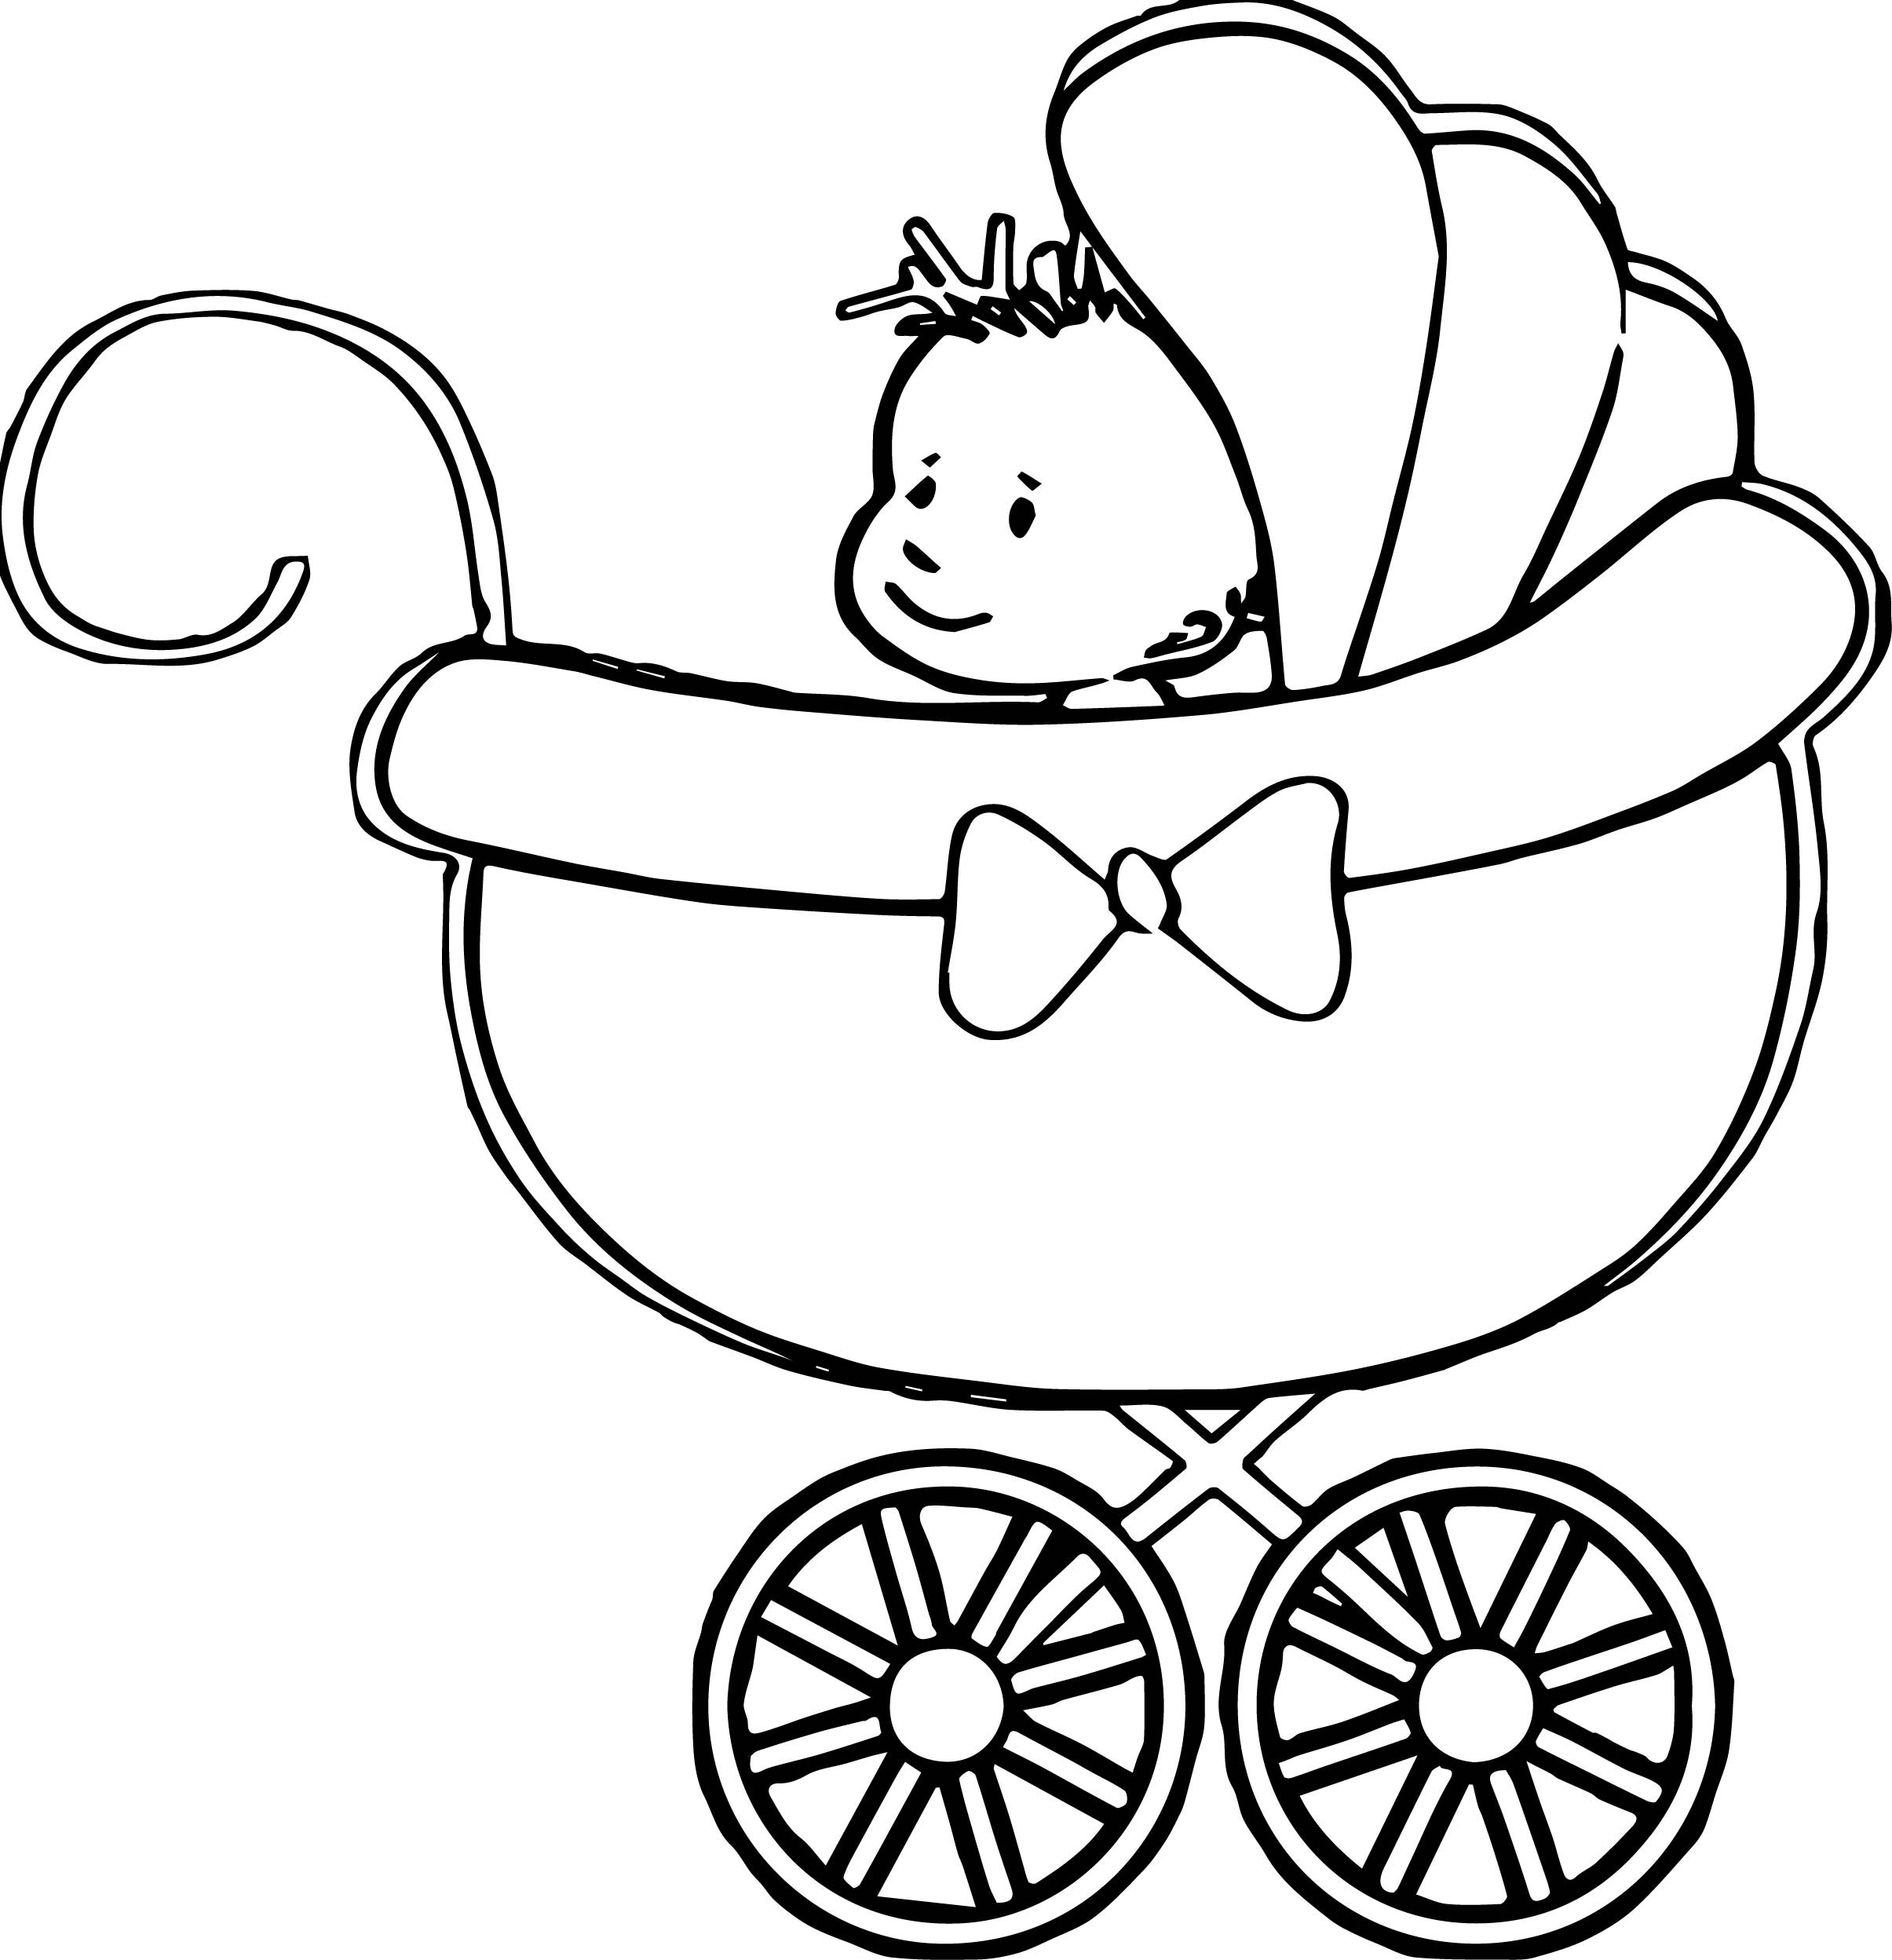 Toddler Boy Coloring Pages
 The Stroller Baby Boy Coloring Page